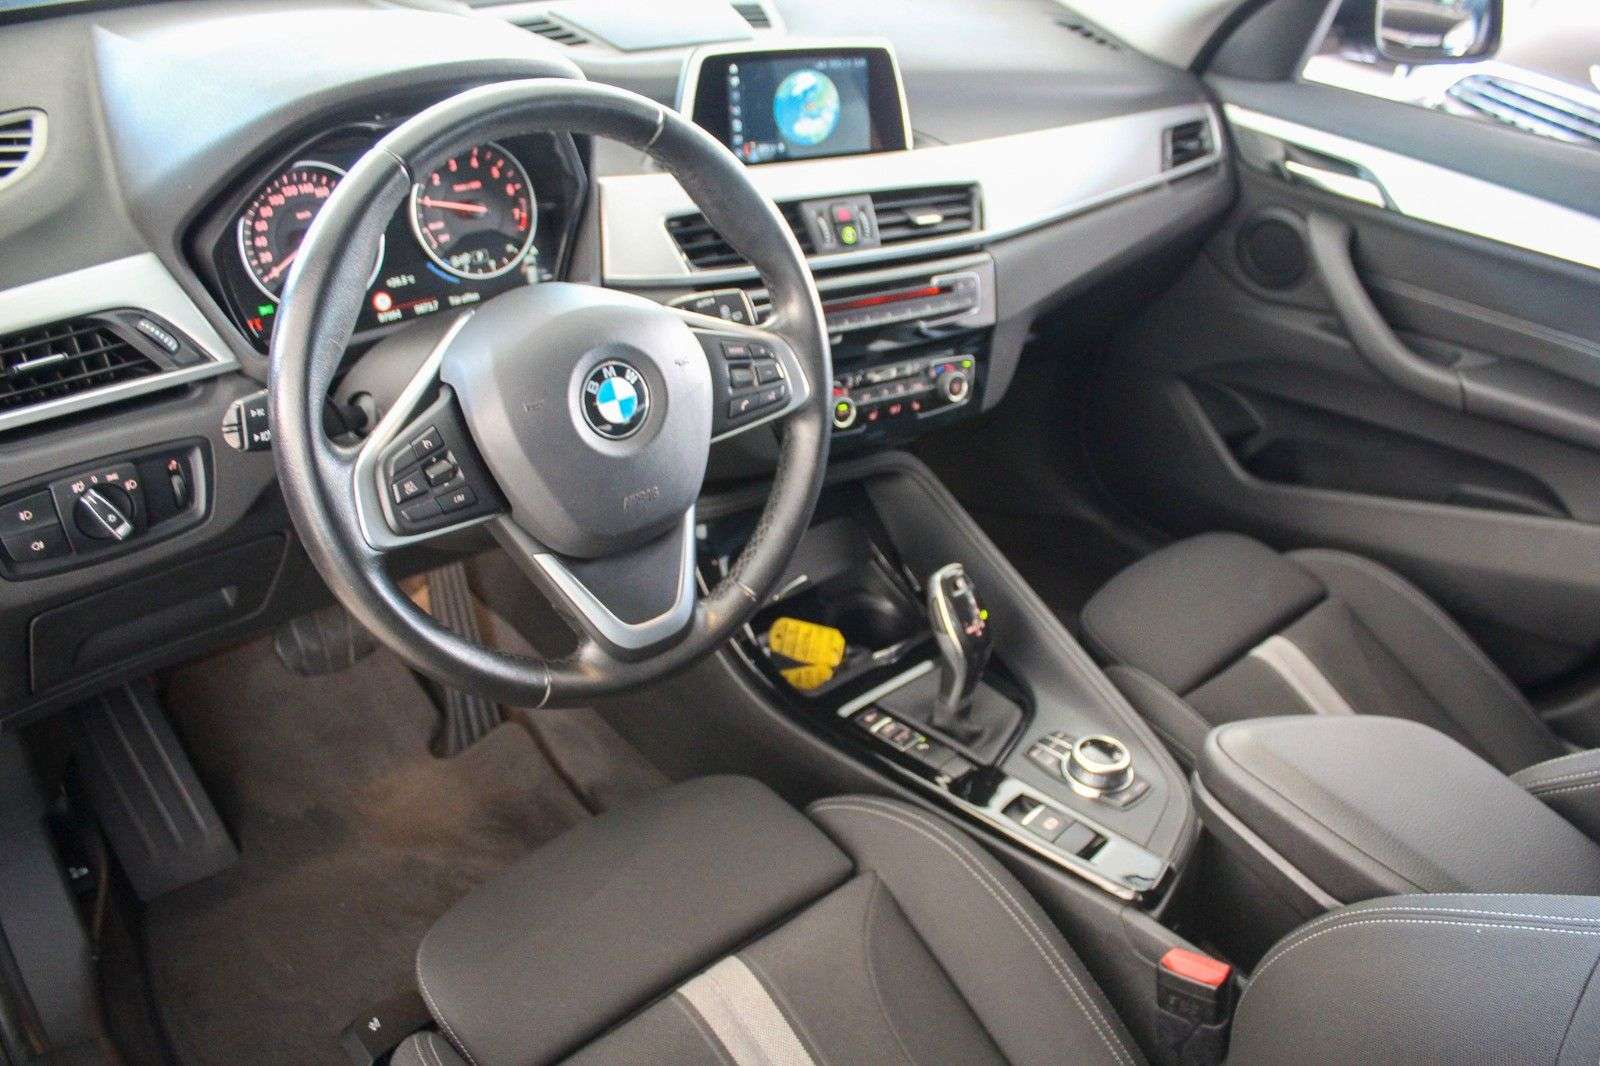 BMW X1 Off-Road/Pick-up in Black used in Hilden (bei Düsseldorf) for € 20,700.-